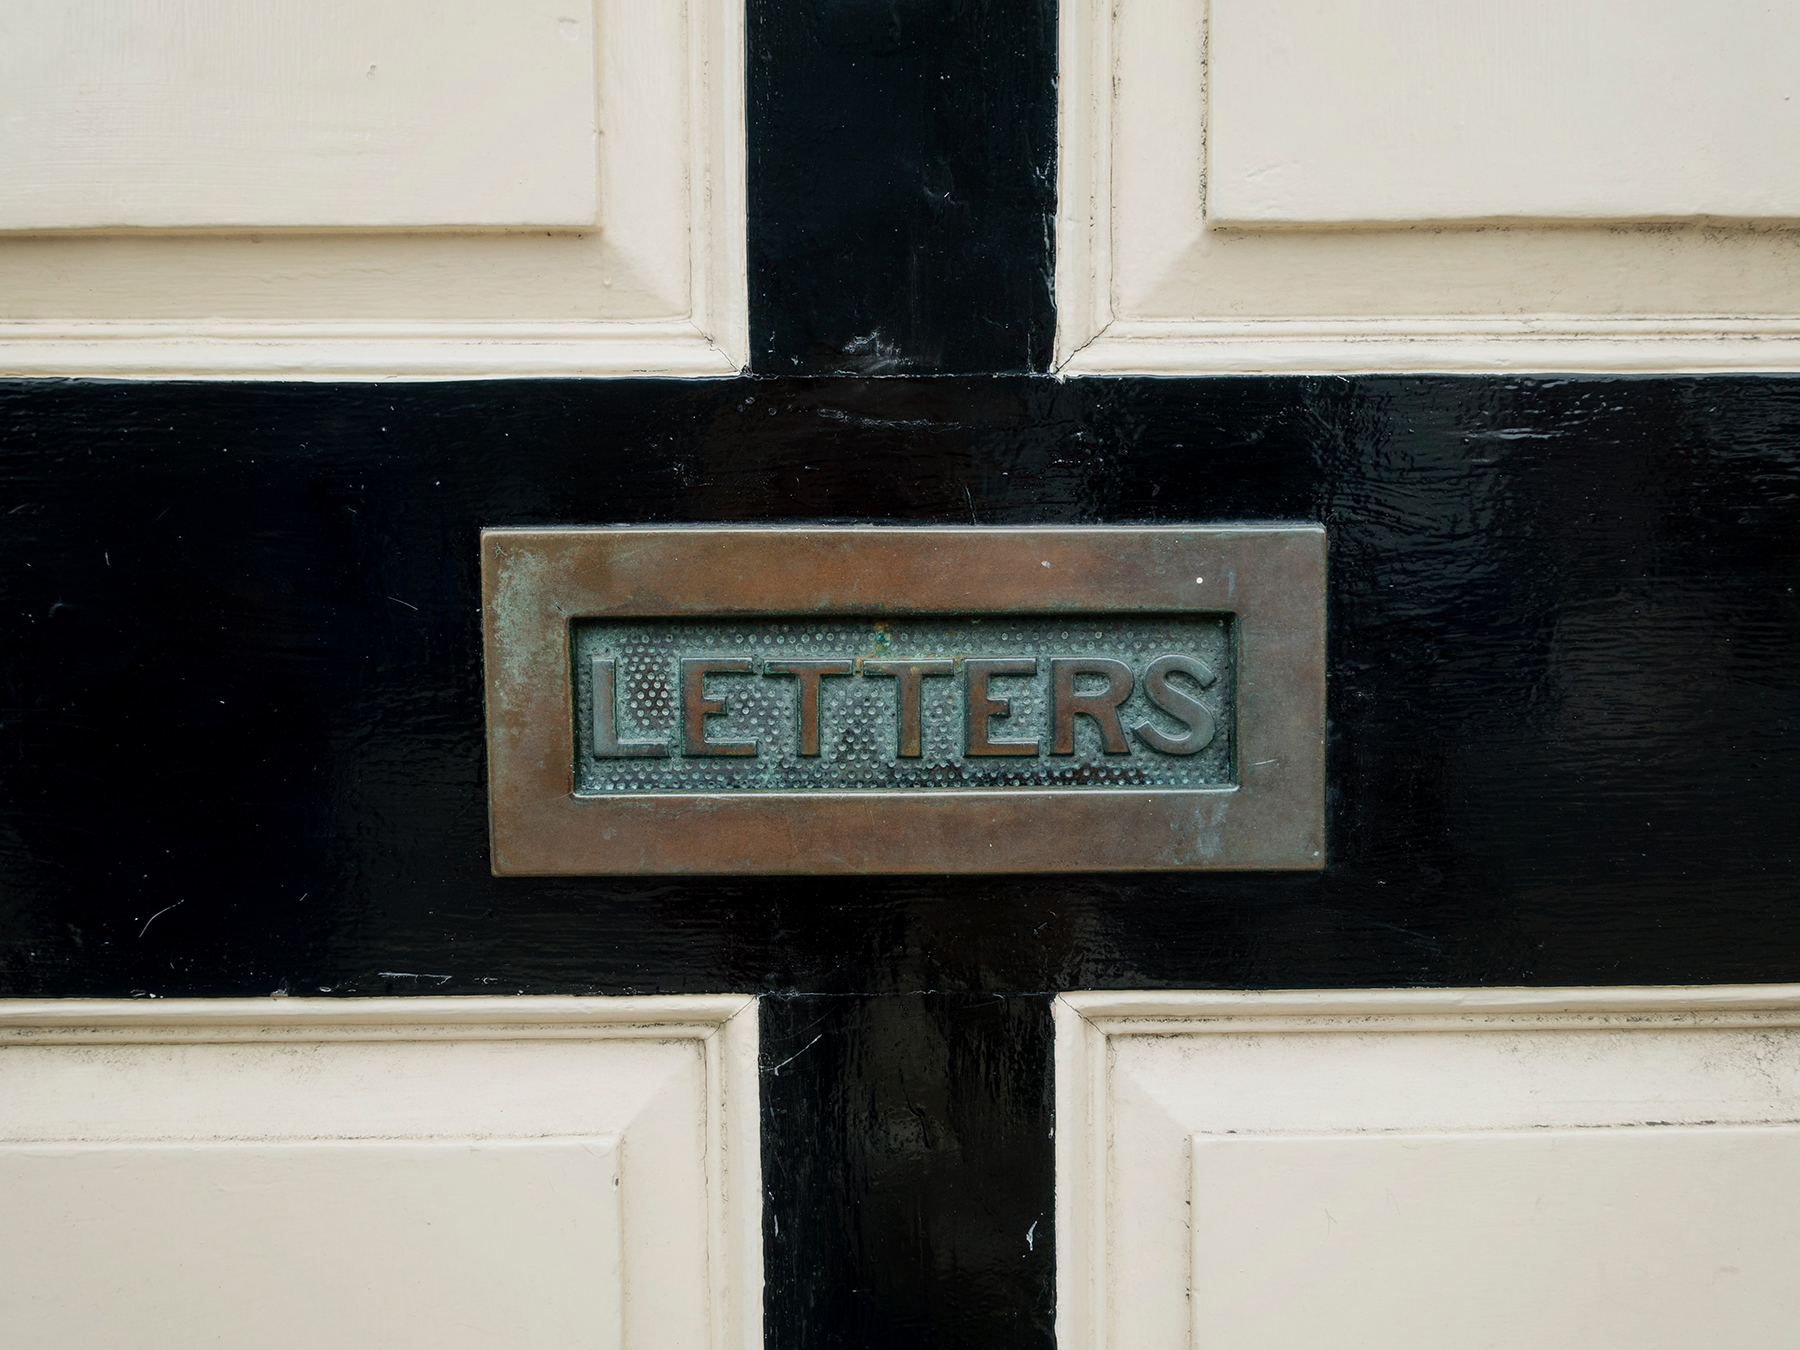 Photograph shows a door with a brass opening to insert mail into.